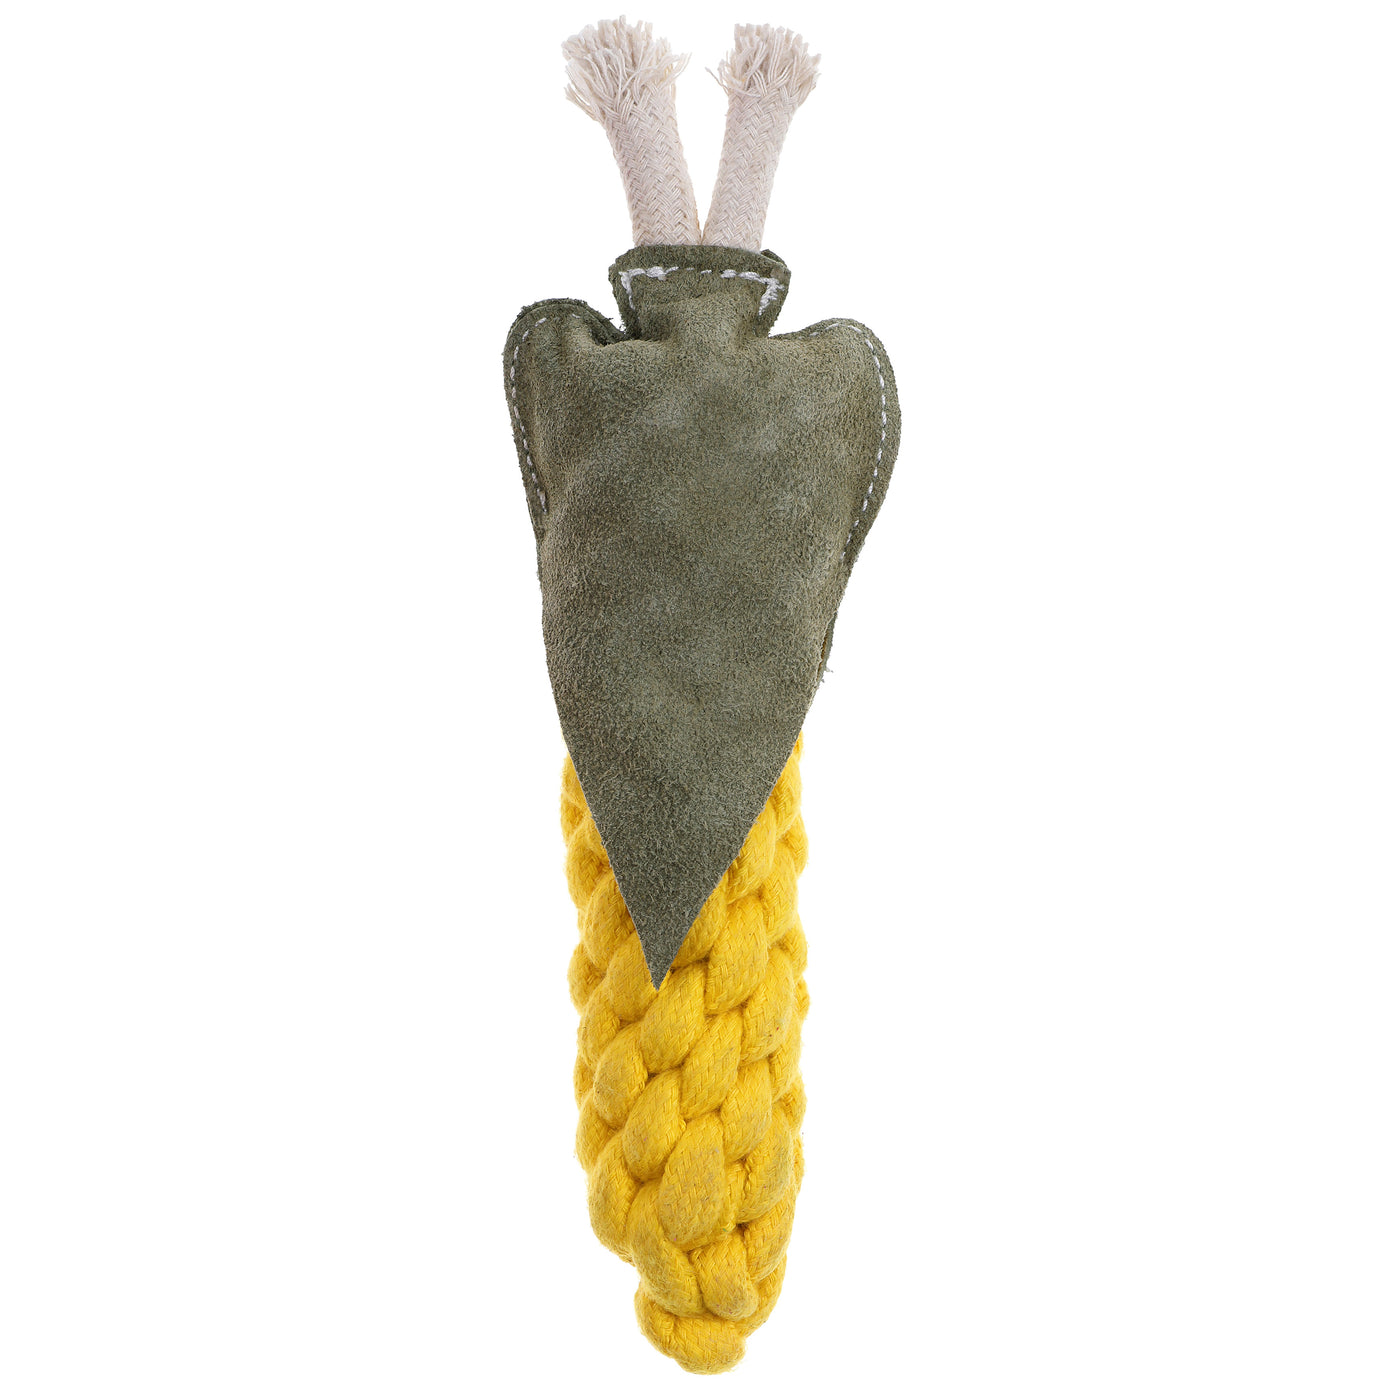 Country Tails Sweet Corn toy